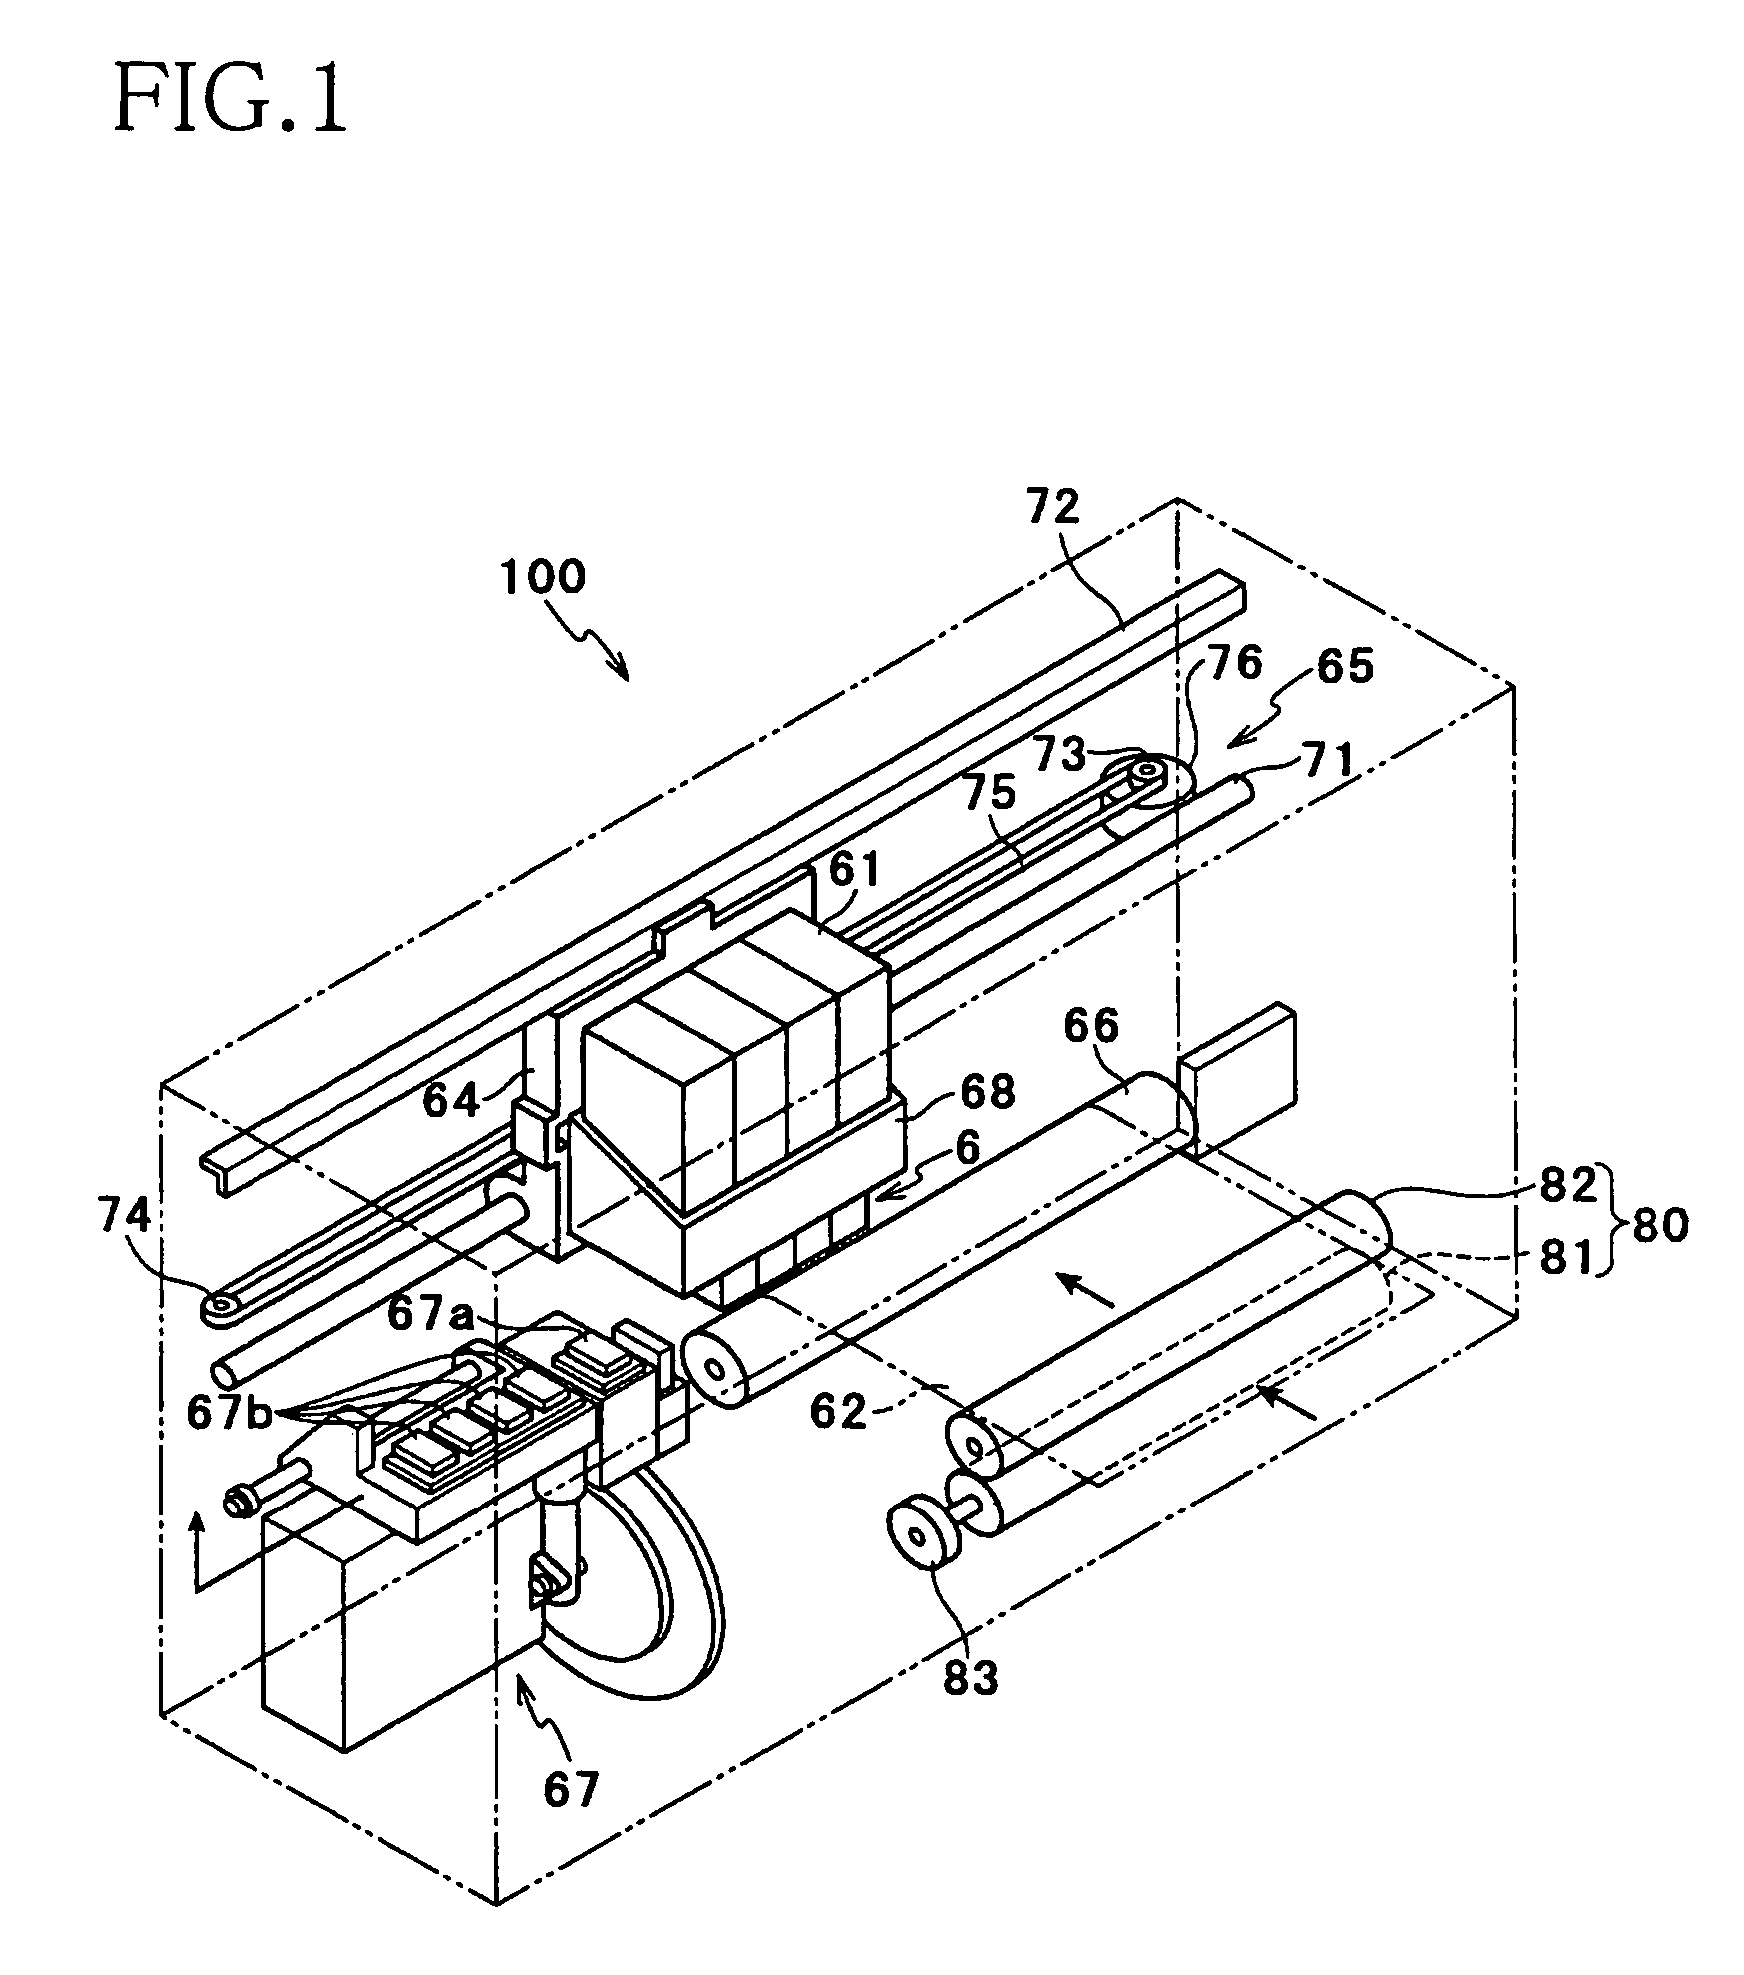 Ink-jet recording apparatus with environmental temperature based drive-signal generation